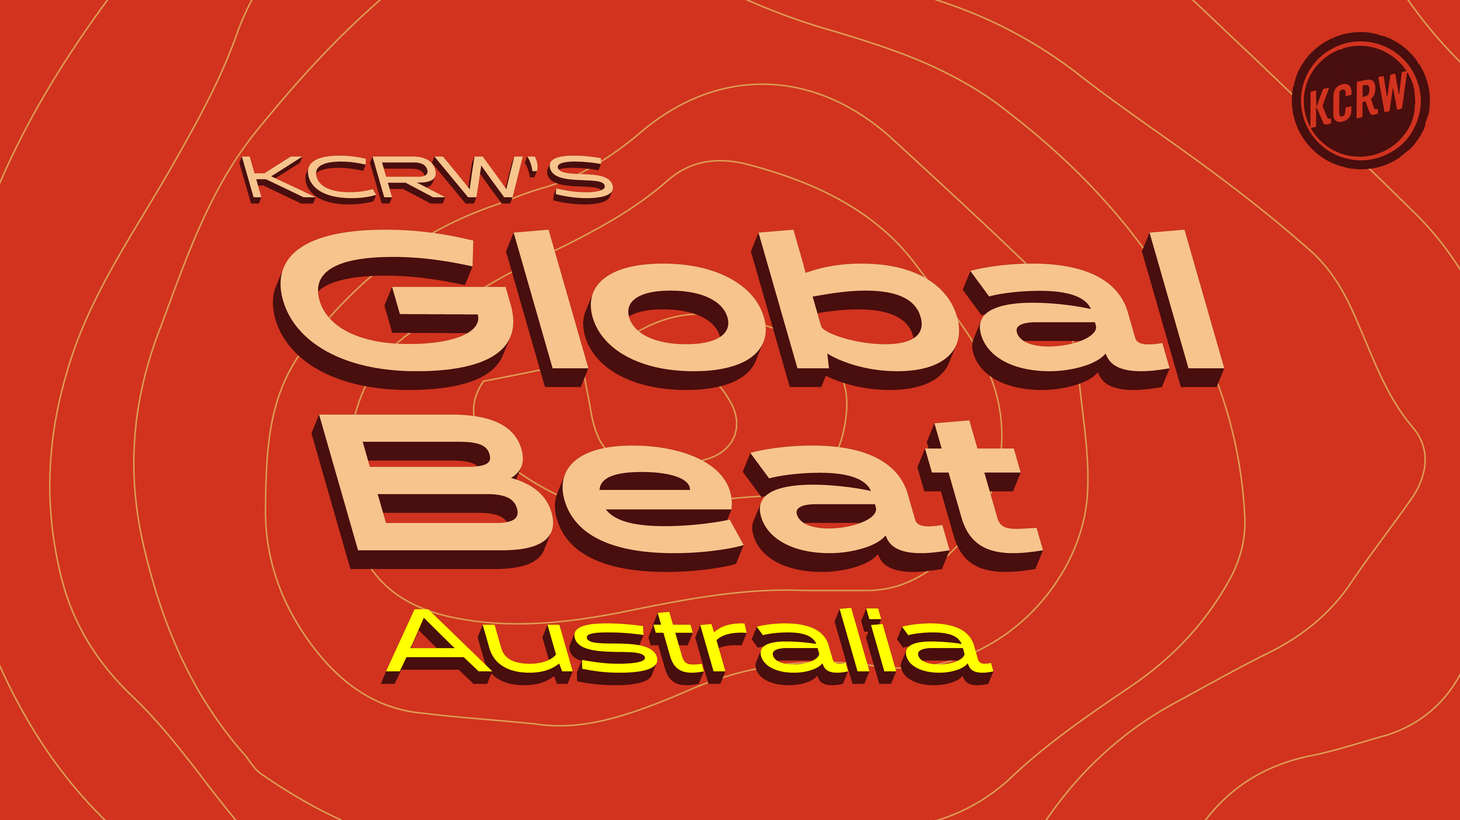 Welcome to KCRW’s Global Beat, a new series highlighting artists from around the world.